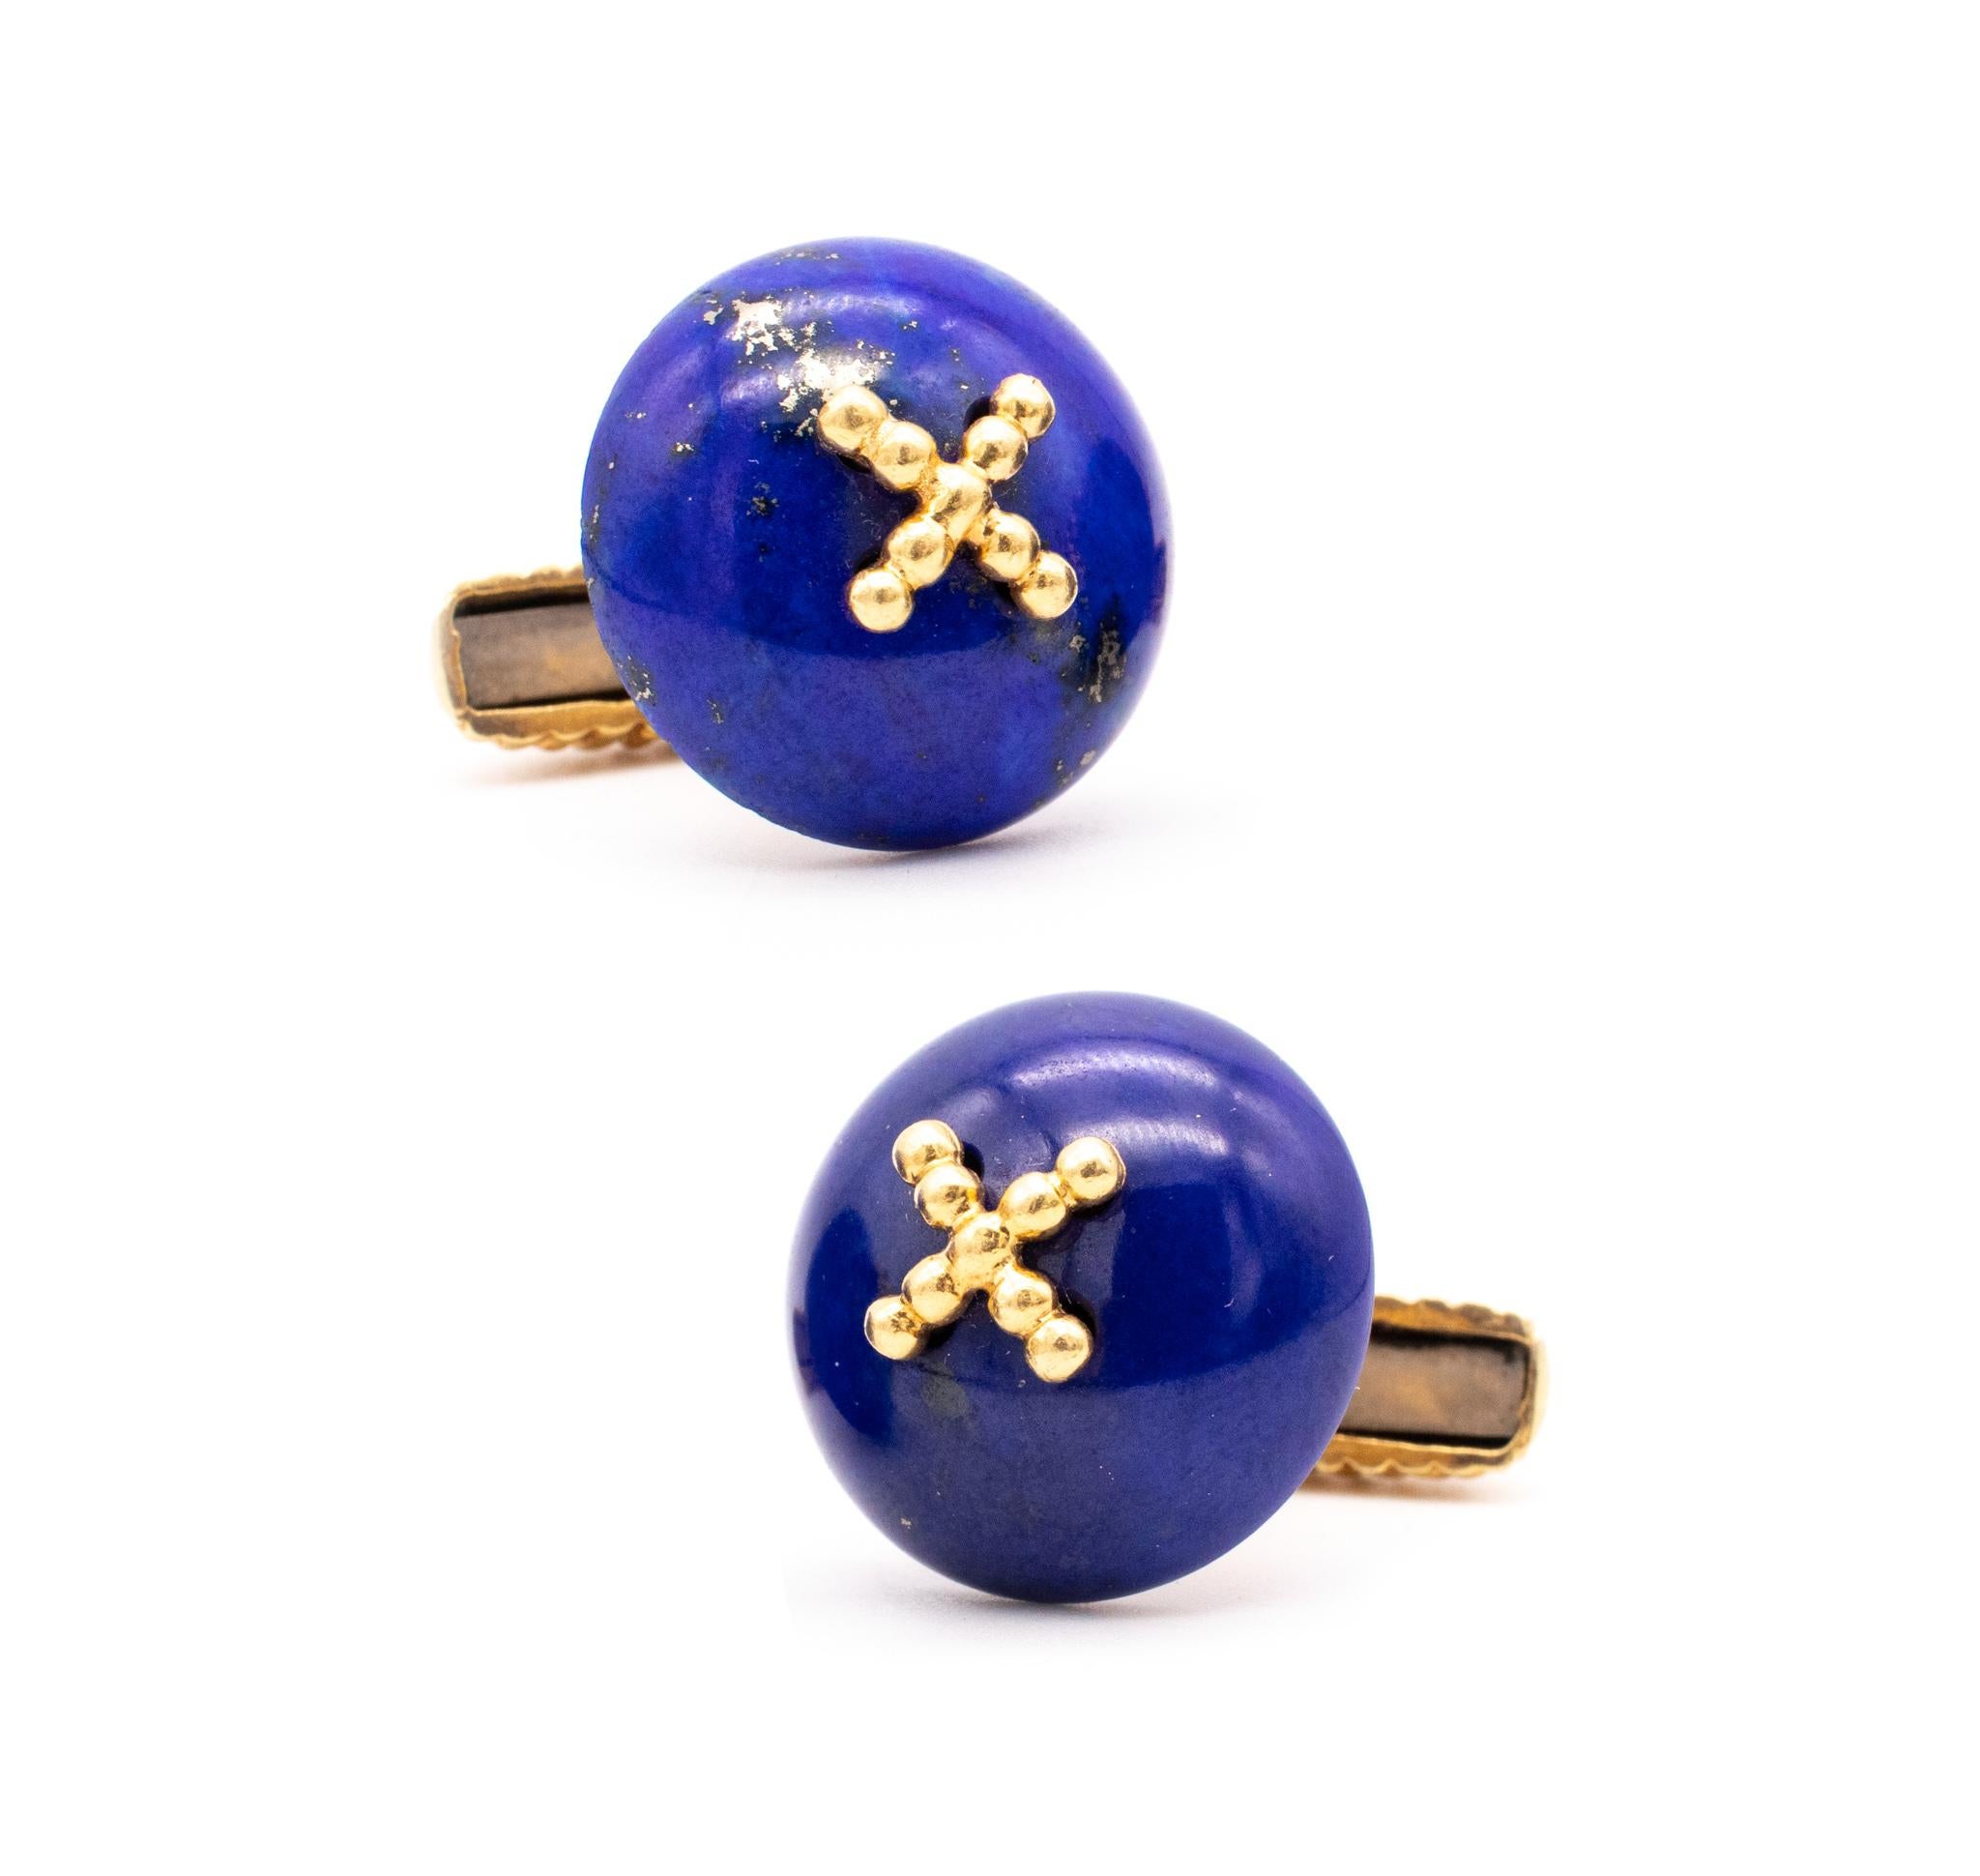 Great pair of European modern cufflinks.

An unique vintage pair of cufflinks made in Italy. They are hand crafted in solid 18 karats of textured yellow gold and suited with flexible hinged t bars.

The top part is embellished with two carved domed